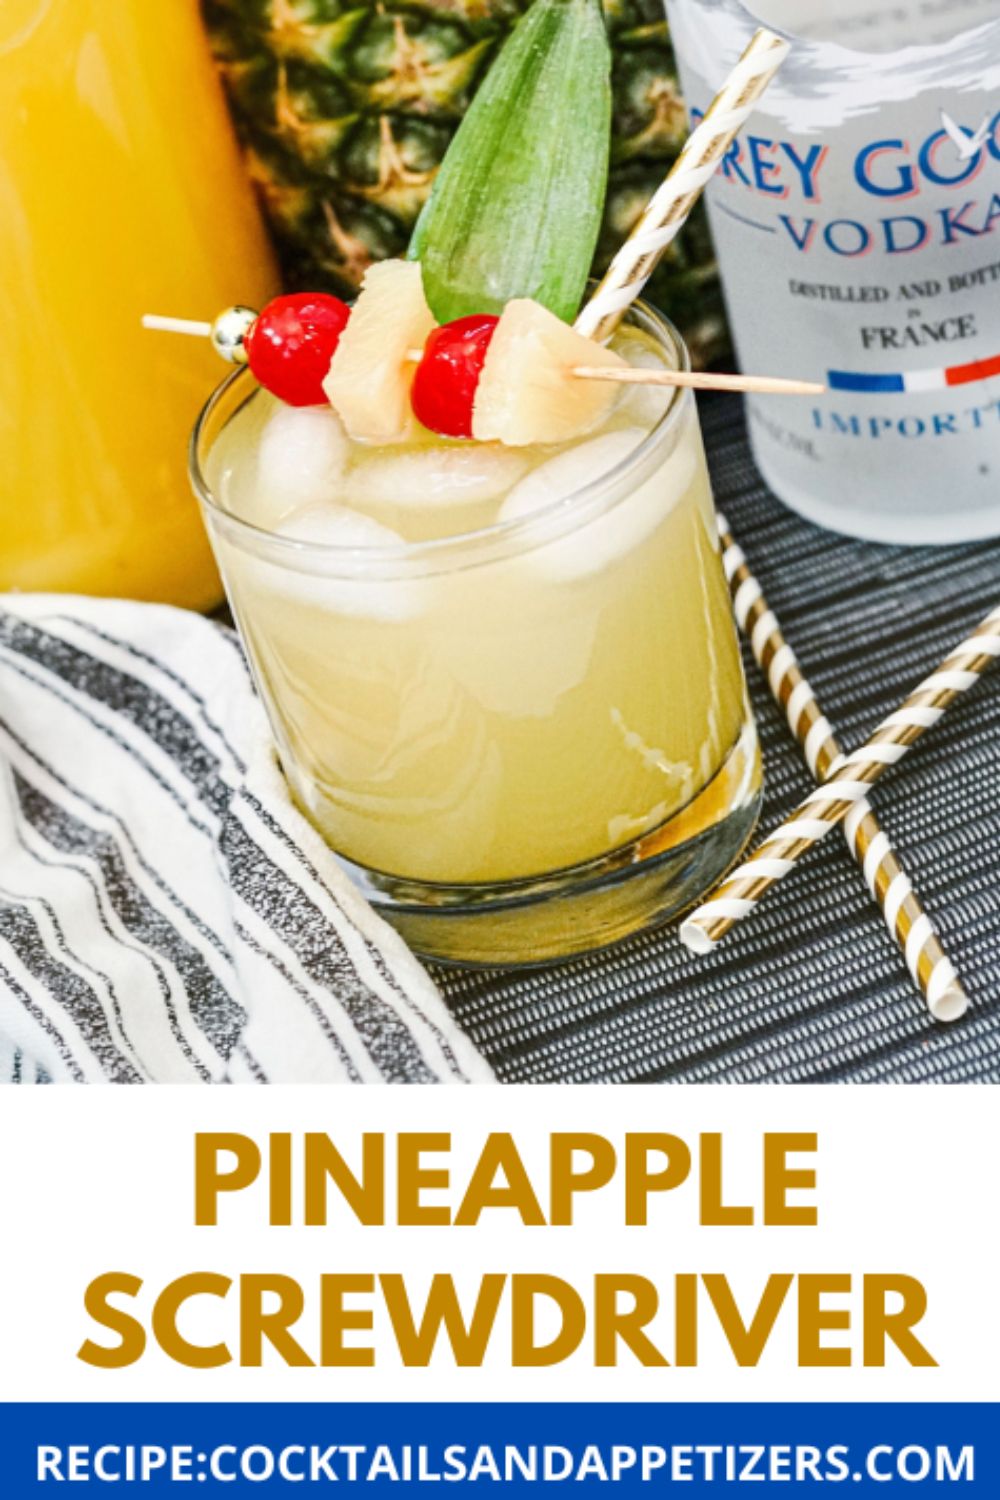 Pineapple Screwdriver cocktail with a cherry garnish.